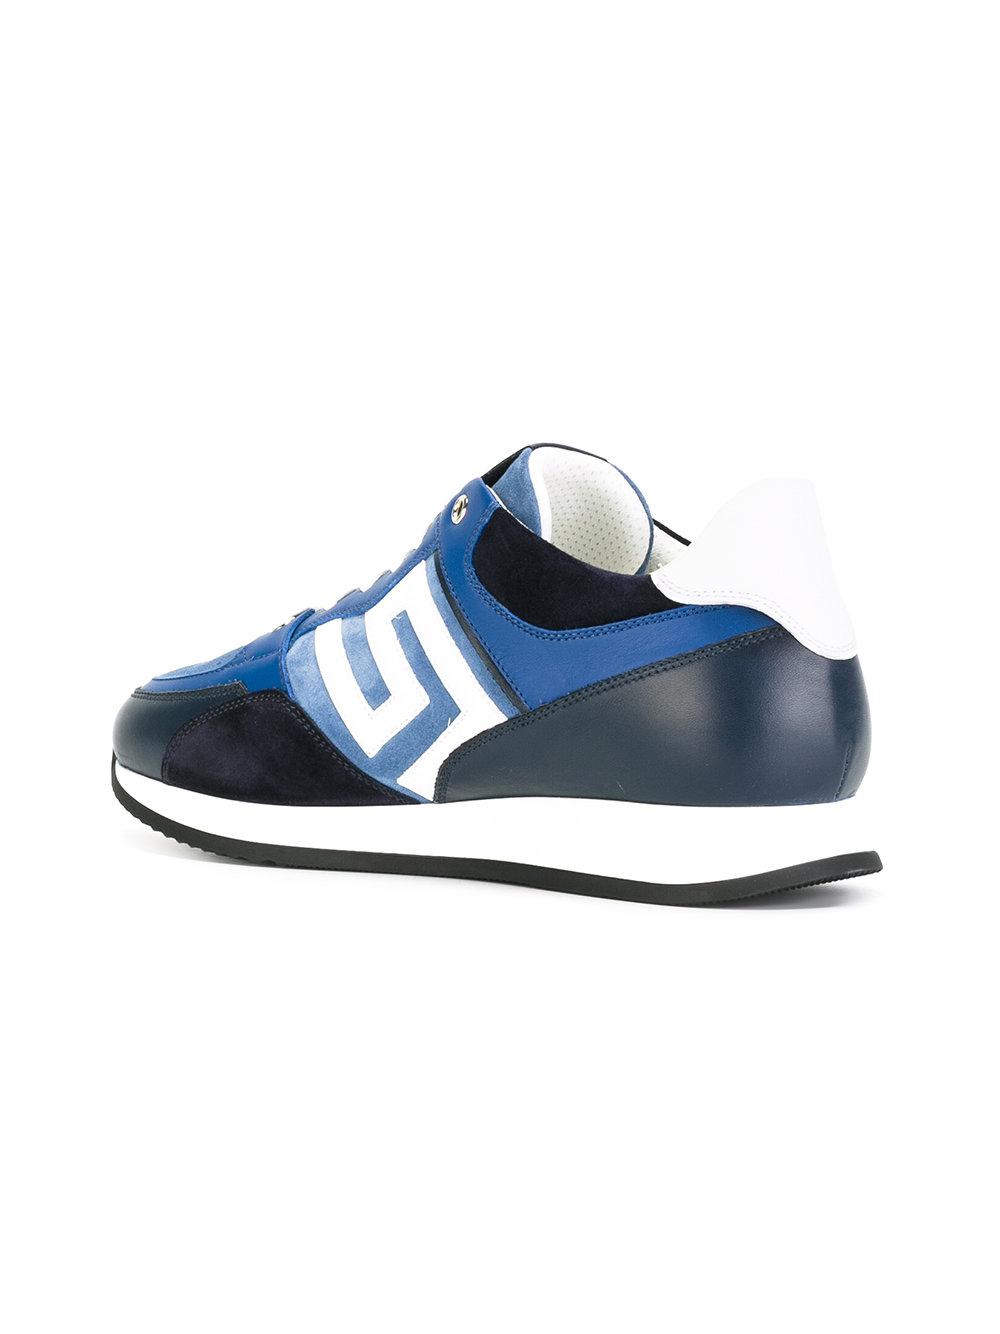 Versace Leather Paneled Greca Sneakers in Blue for Men - Lyst